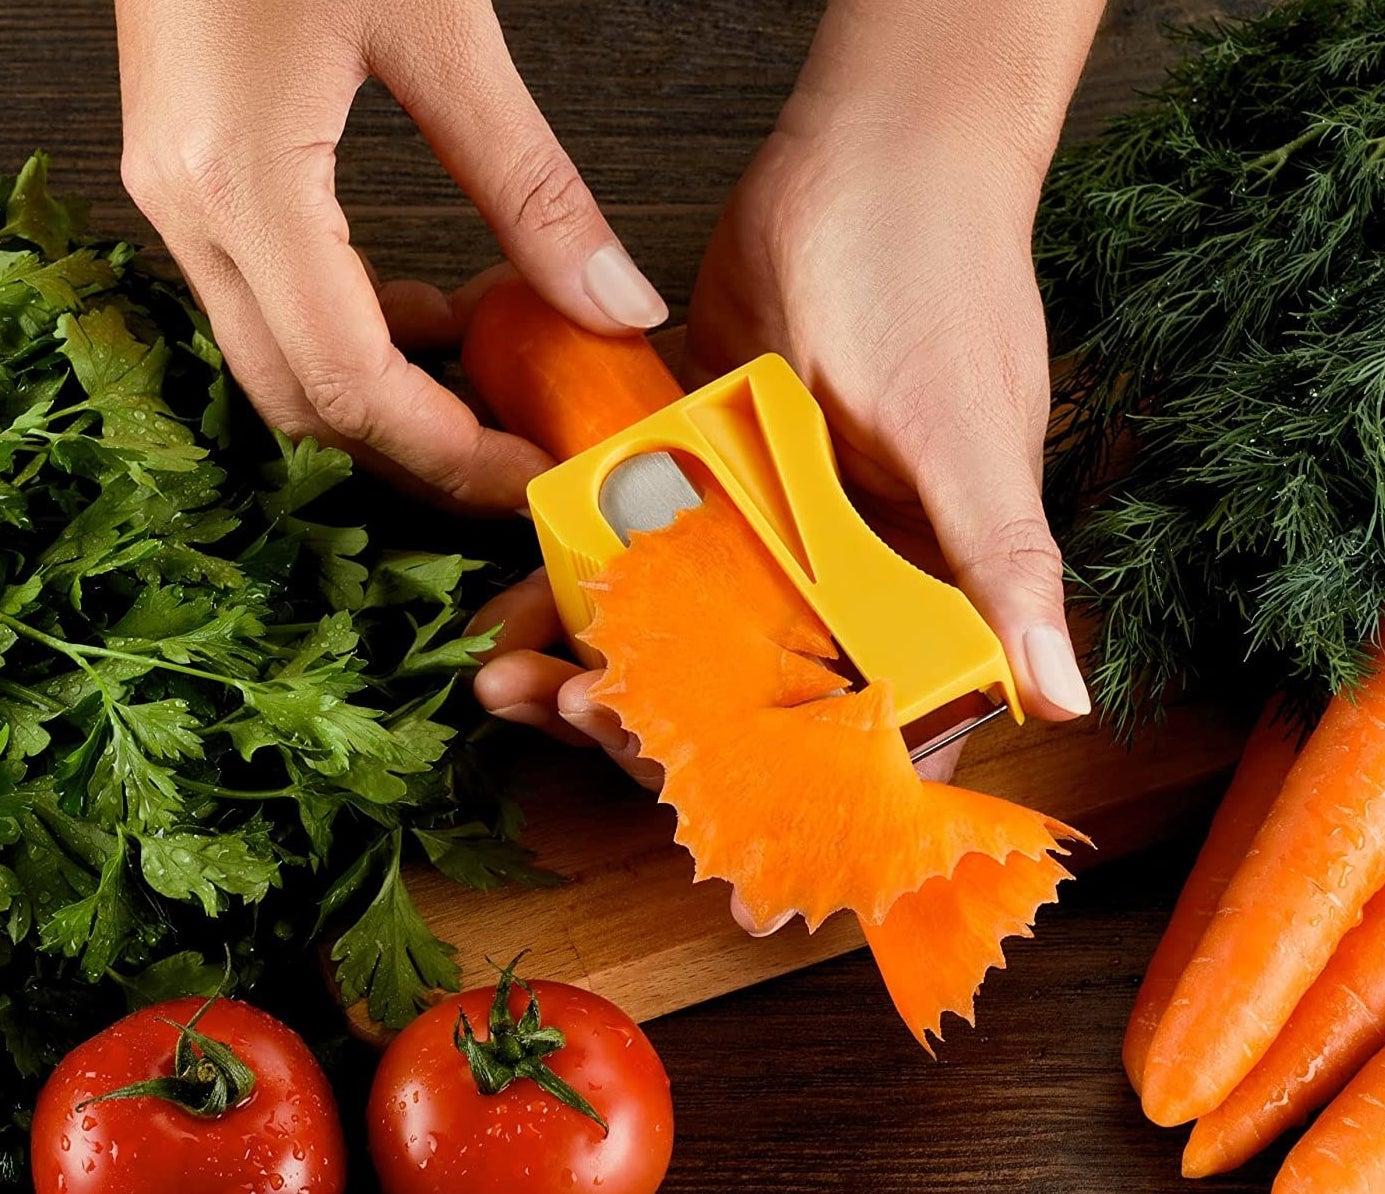 a person using the pencil sharpener- shaped veggie peeler